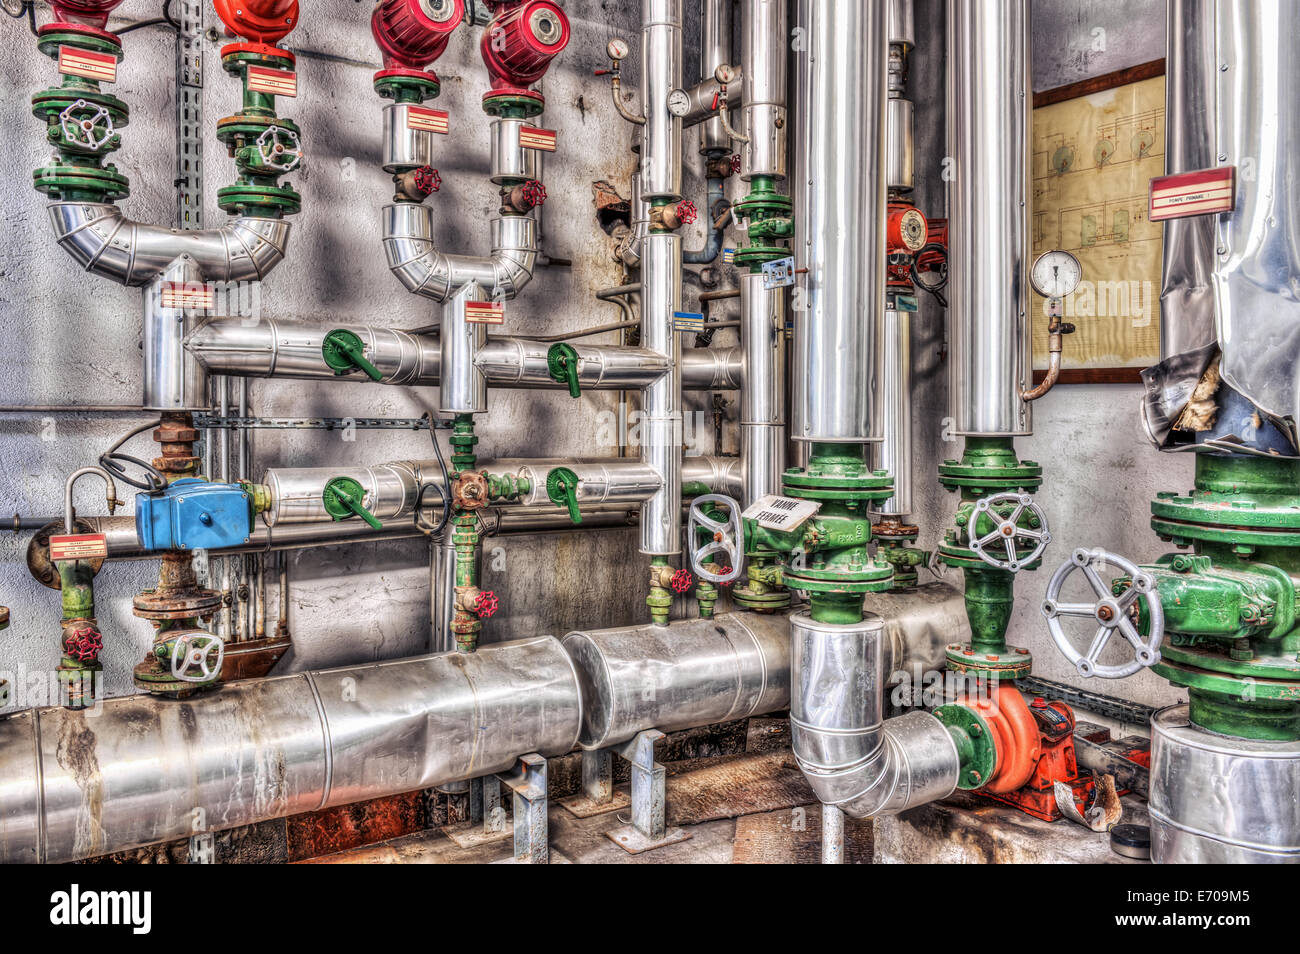 Abandoned industrial boiler room Stock Photo